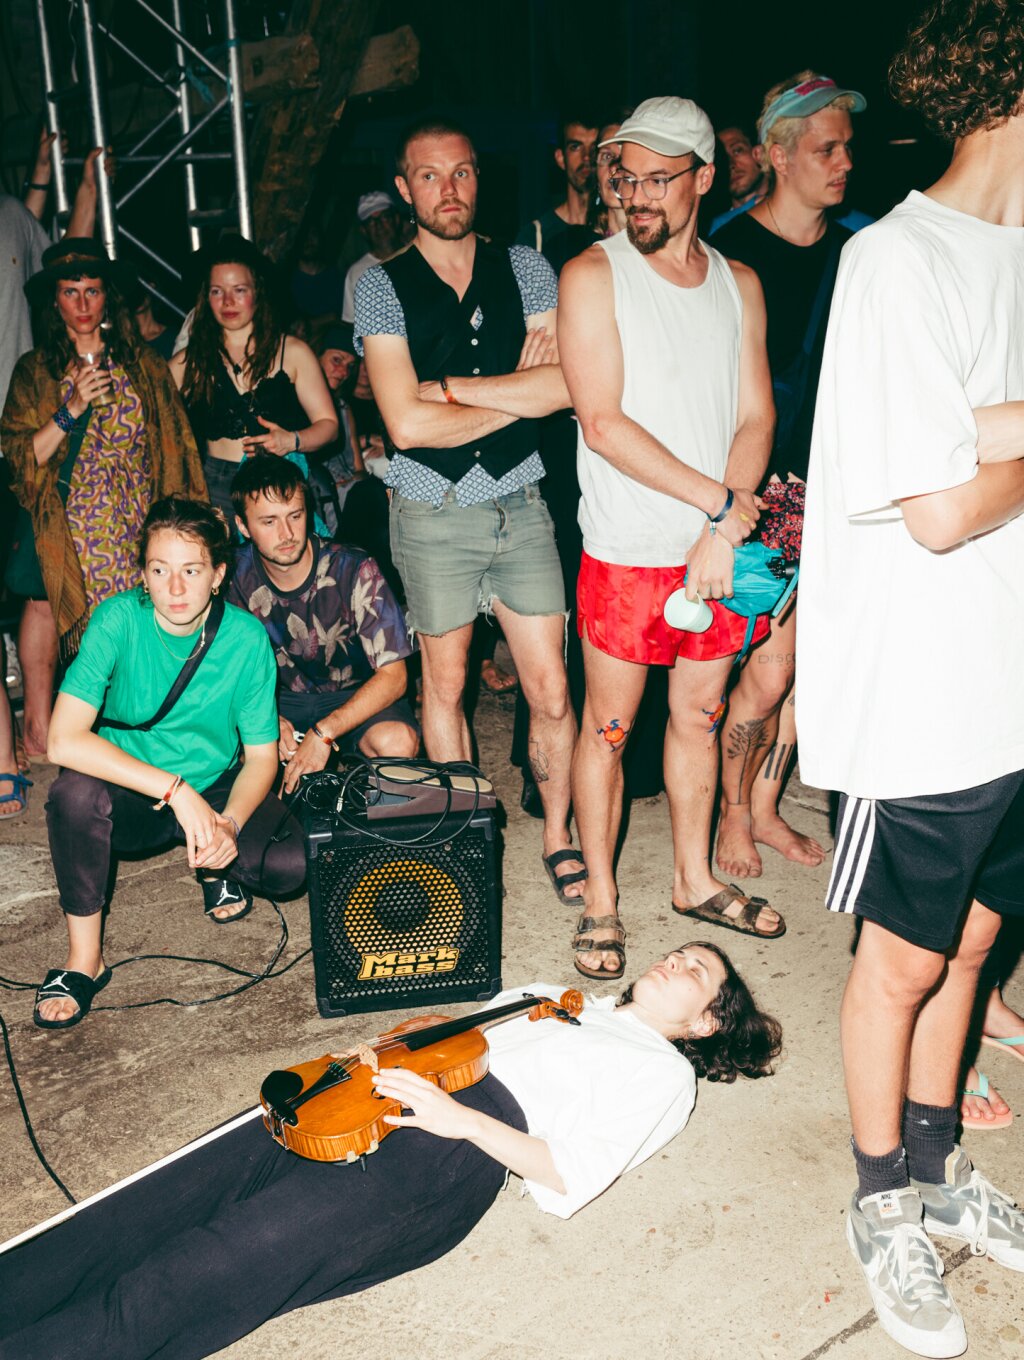 A woman with a violin lies on the floor with the audience in summer clothing standing around her.